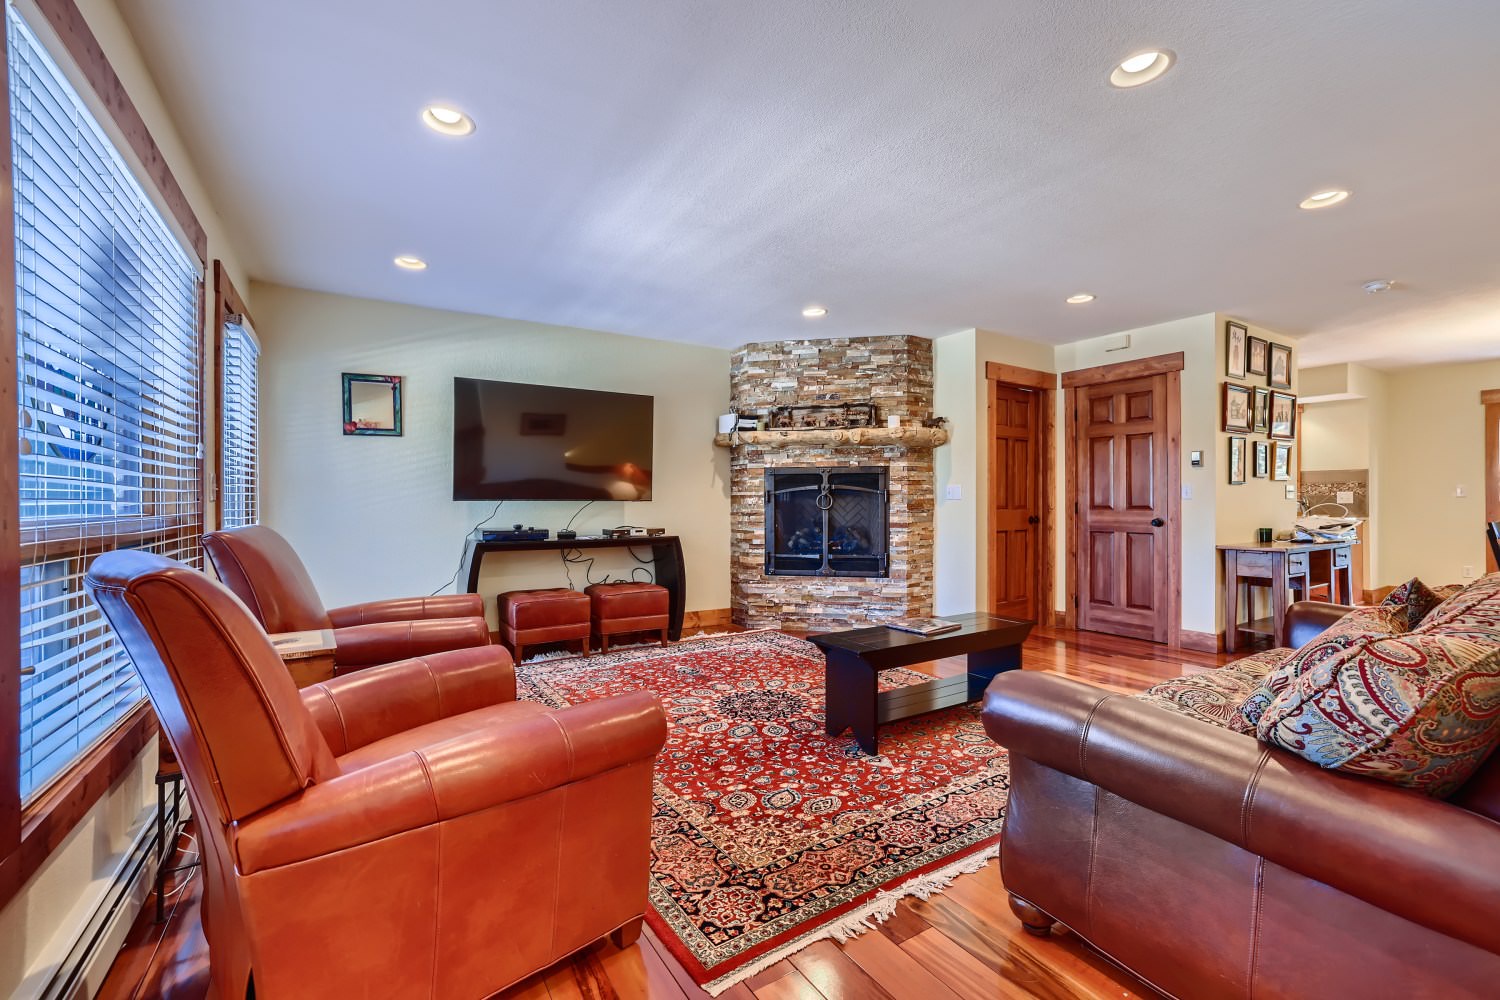 Living room with TV, and gas fireplace